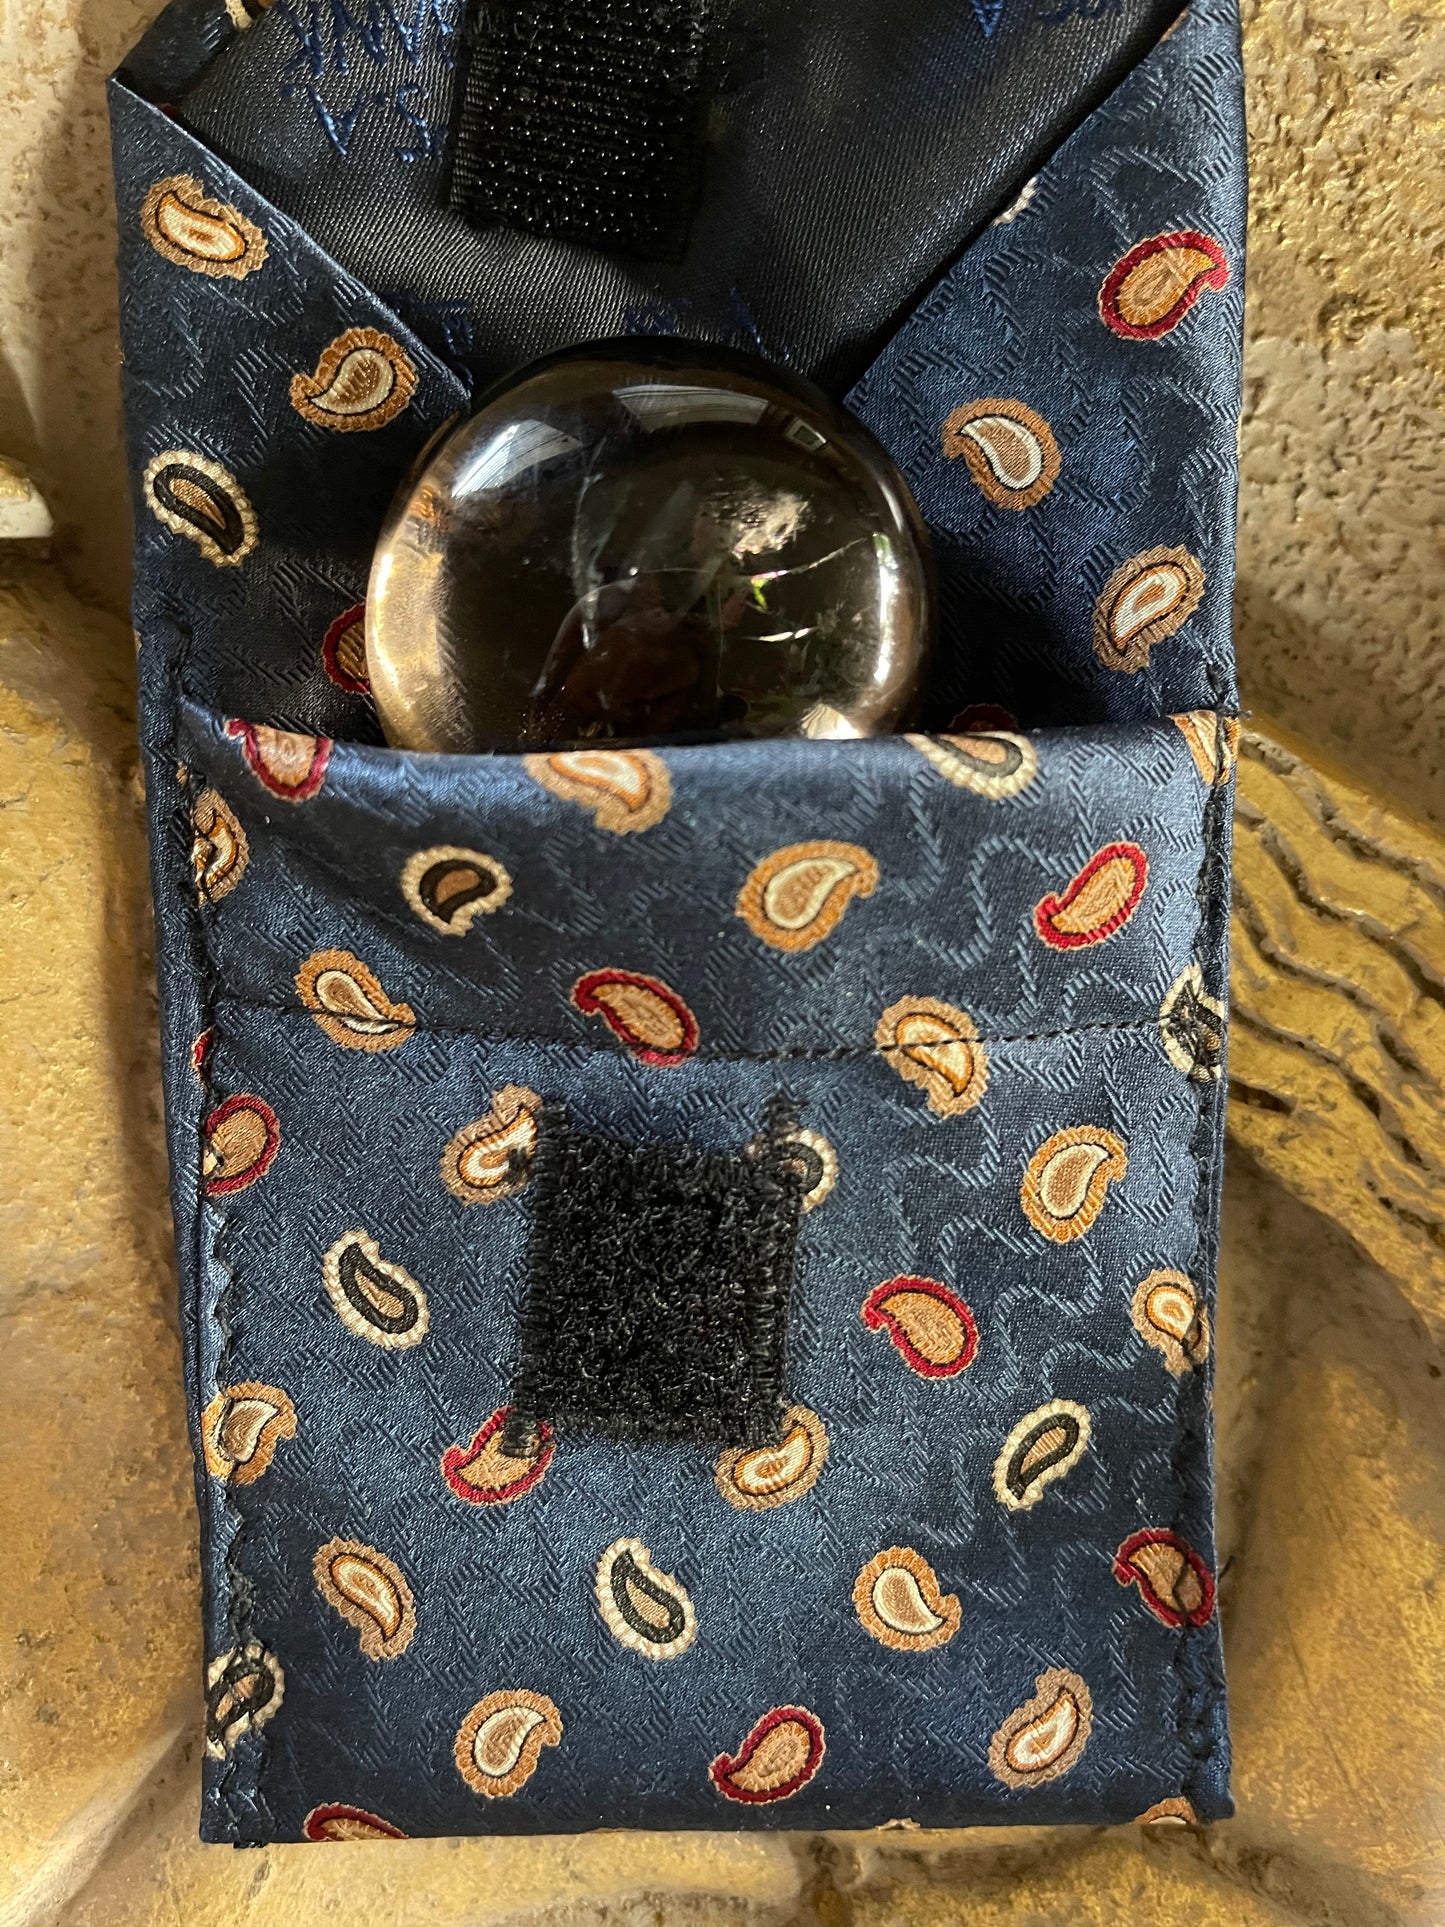 Upcycled Tie, Palm Stone Keeper, Tea Bag Travel Case, Bodhi Lovecycled